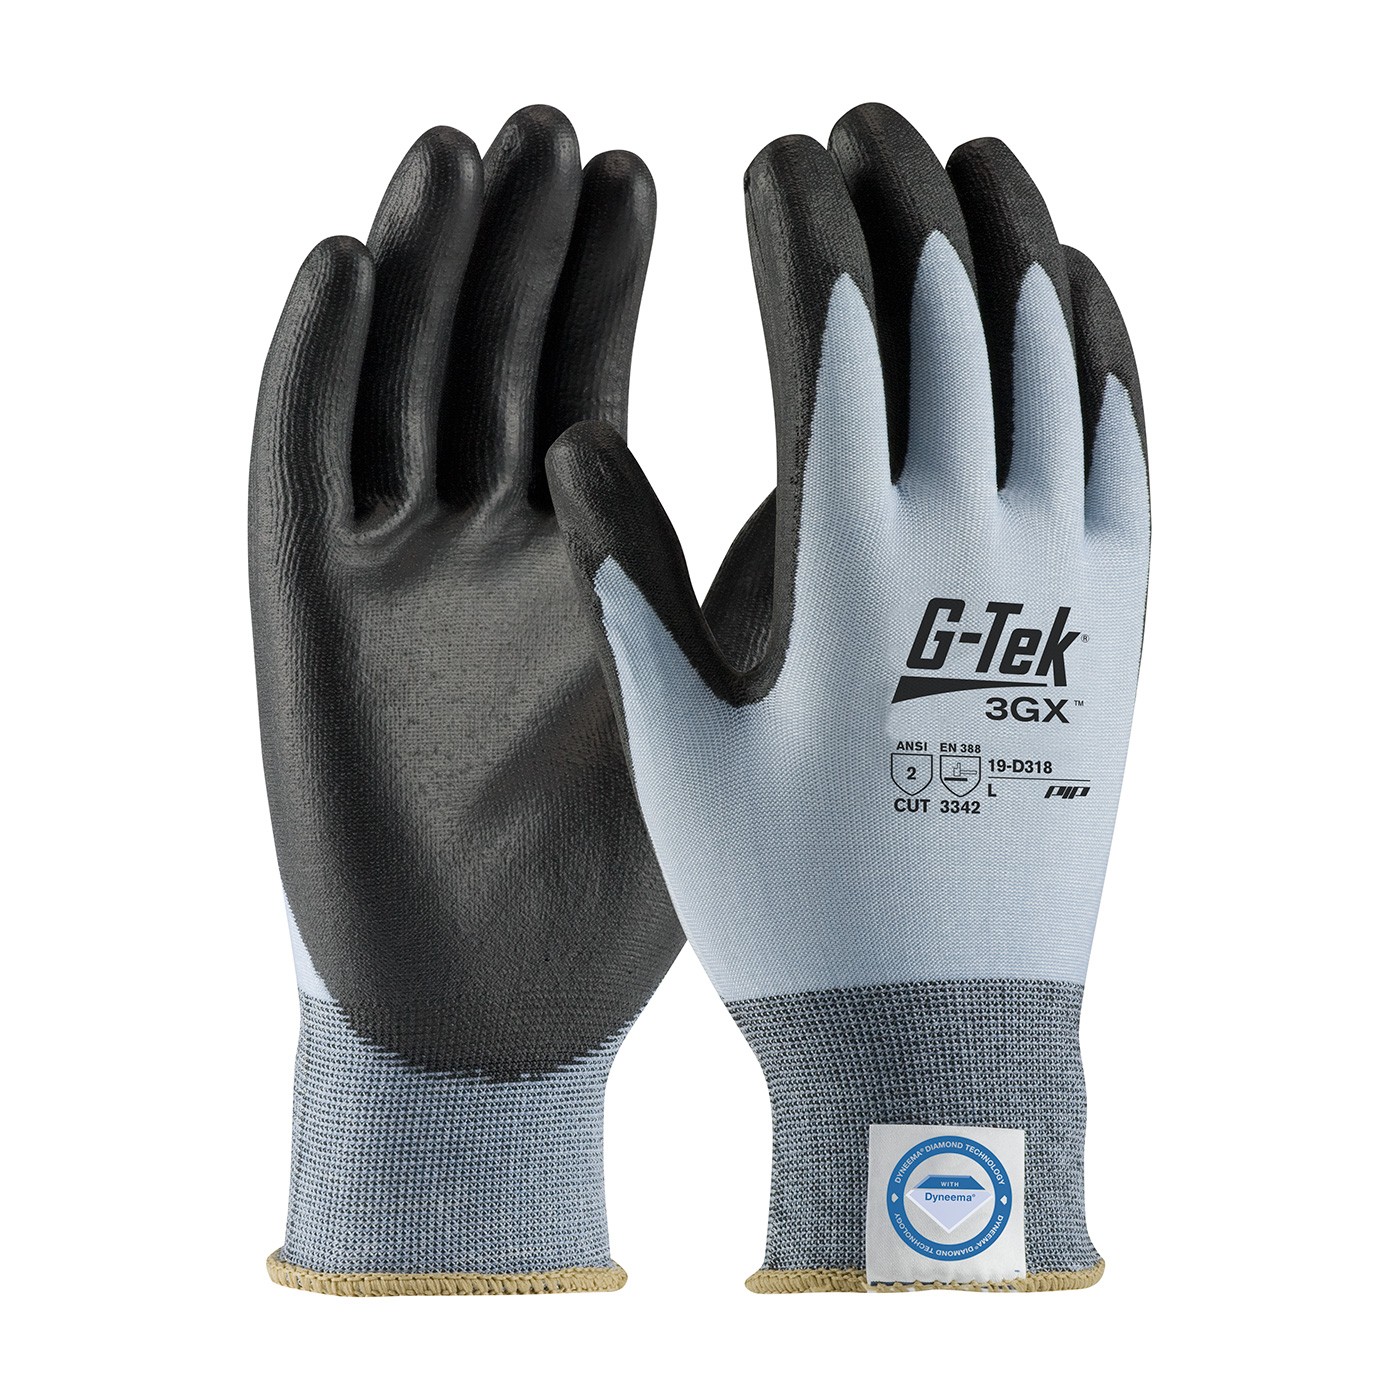 G-Tek® 3GX® Seamless Knit Dyneema® Diamond Blended Glove with Polyurethane Coated Smooth Grip on Palm & Fingers  (#19-D318)